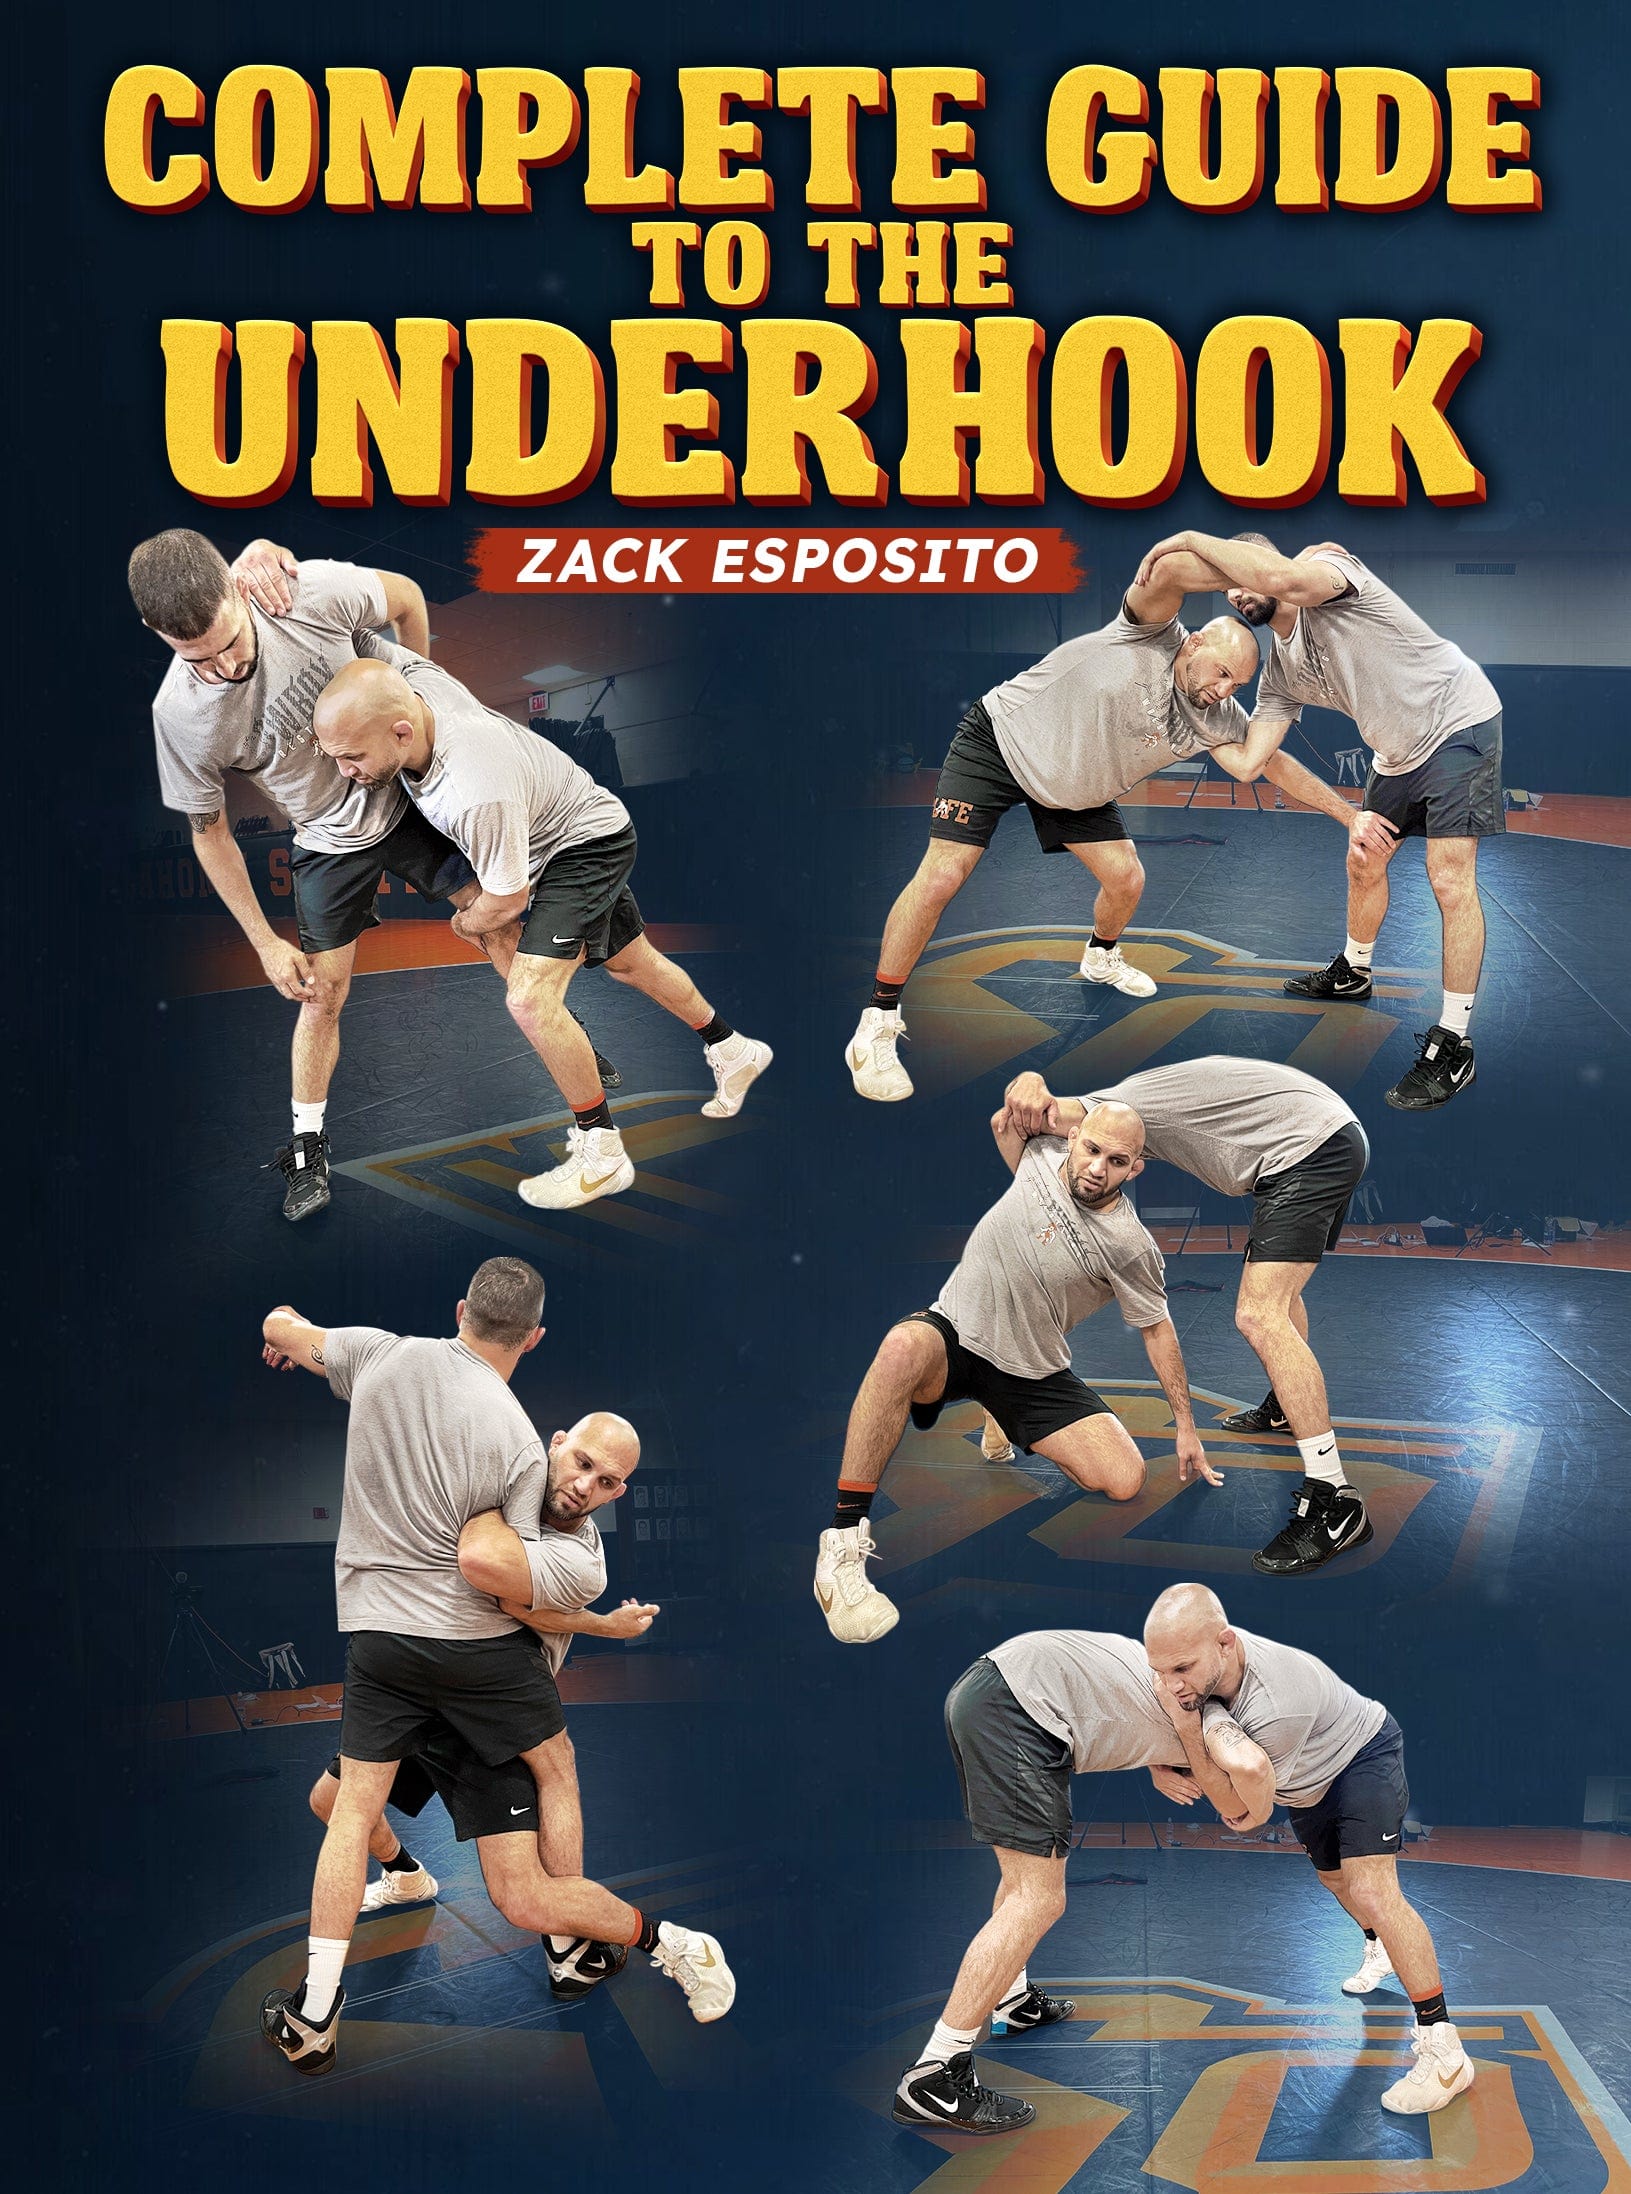 Complete Guide To the Underhook by Zack Esposito - Fanatic Wrestling